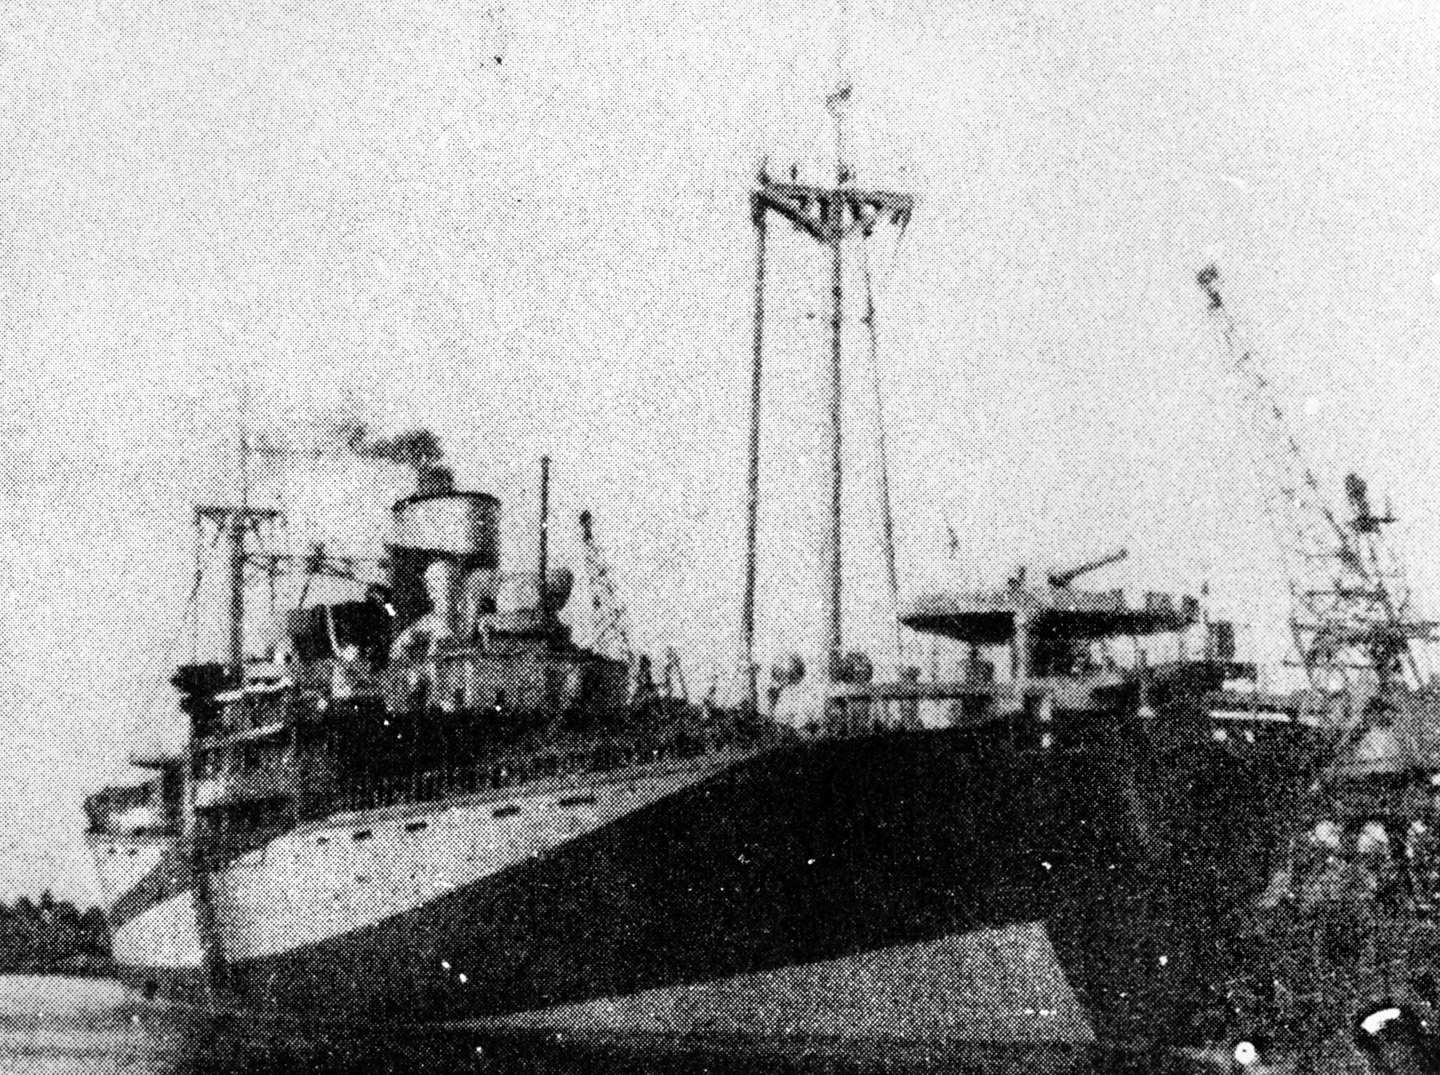 The Japanese ship Sagara Maru, in Singapore harbor in 1942, with camouflage of light gray and black. 